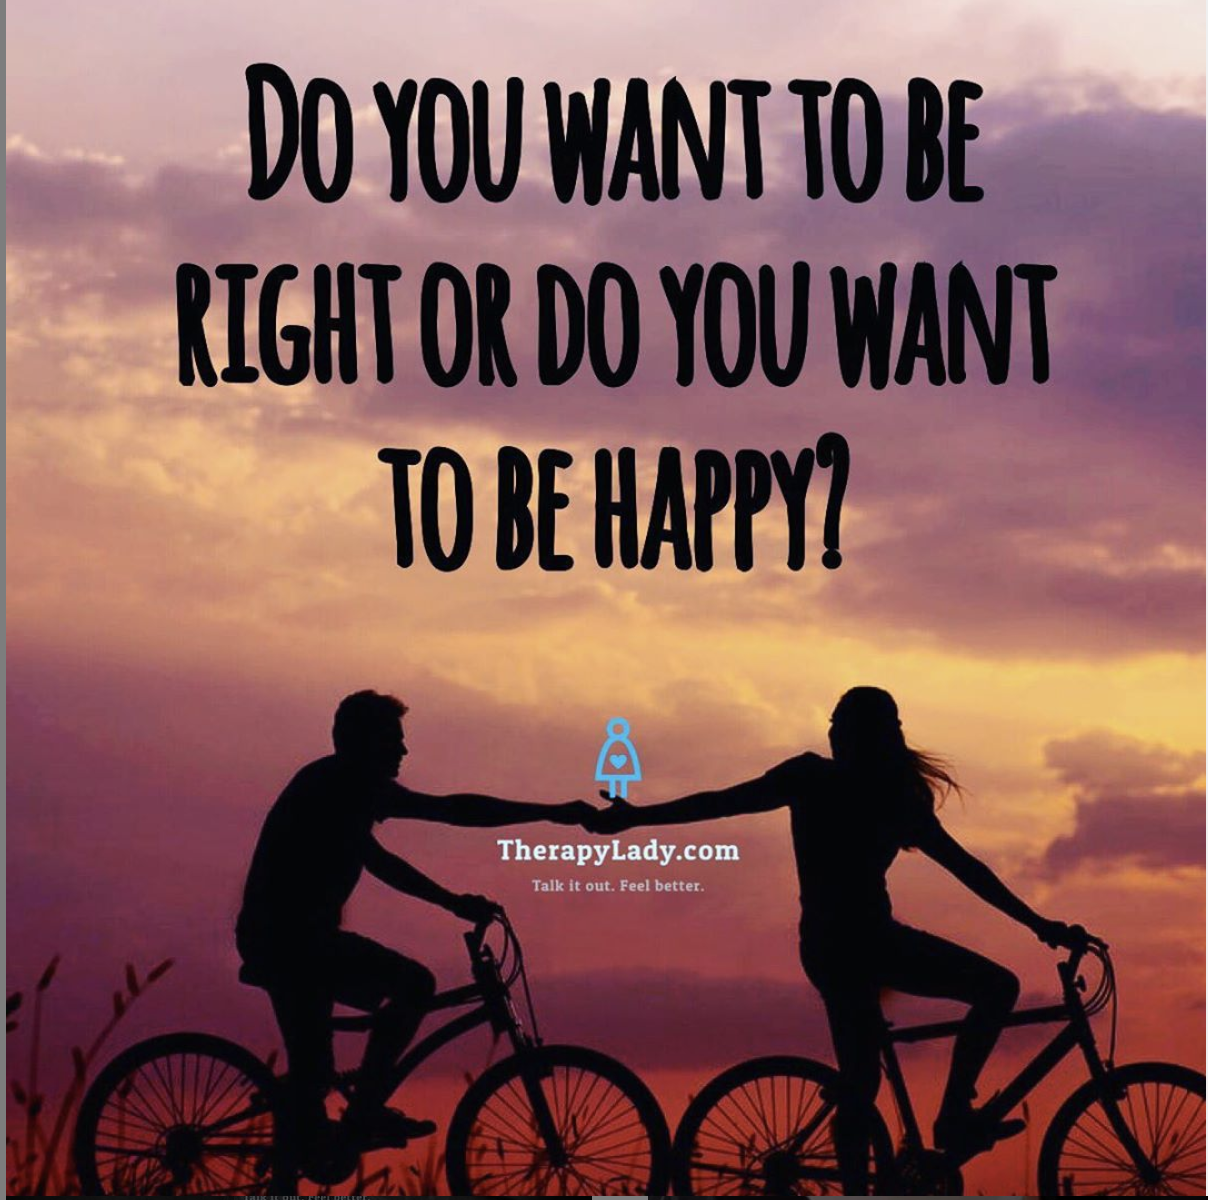 Do you want to be my friend?. I want you to be Happy. Do you want be right or Happy. You want to be. Whether you want